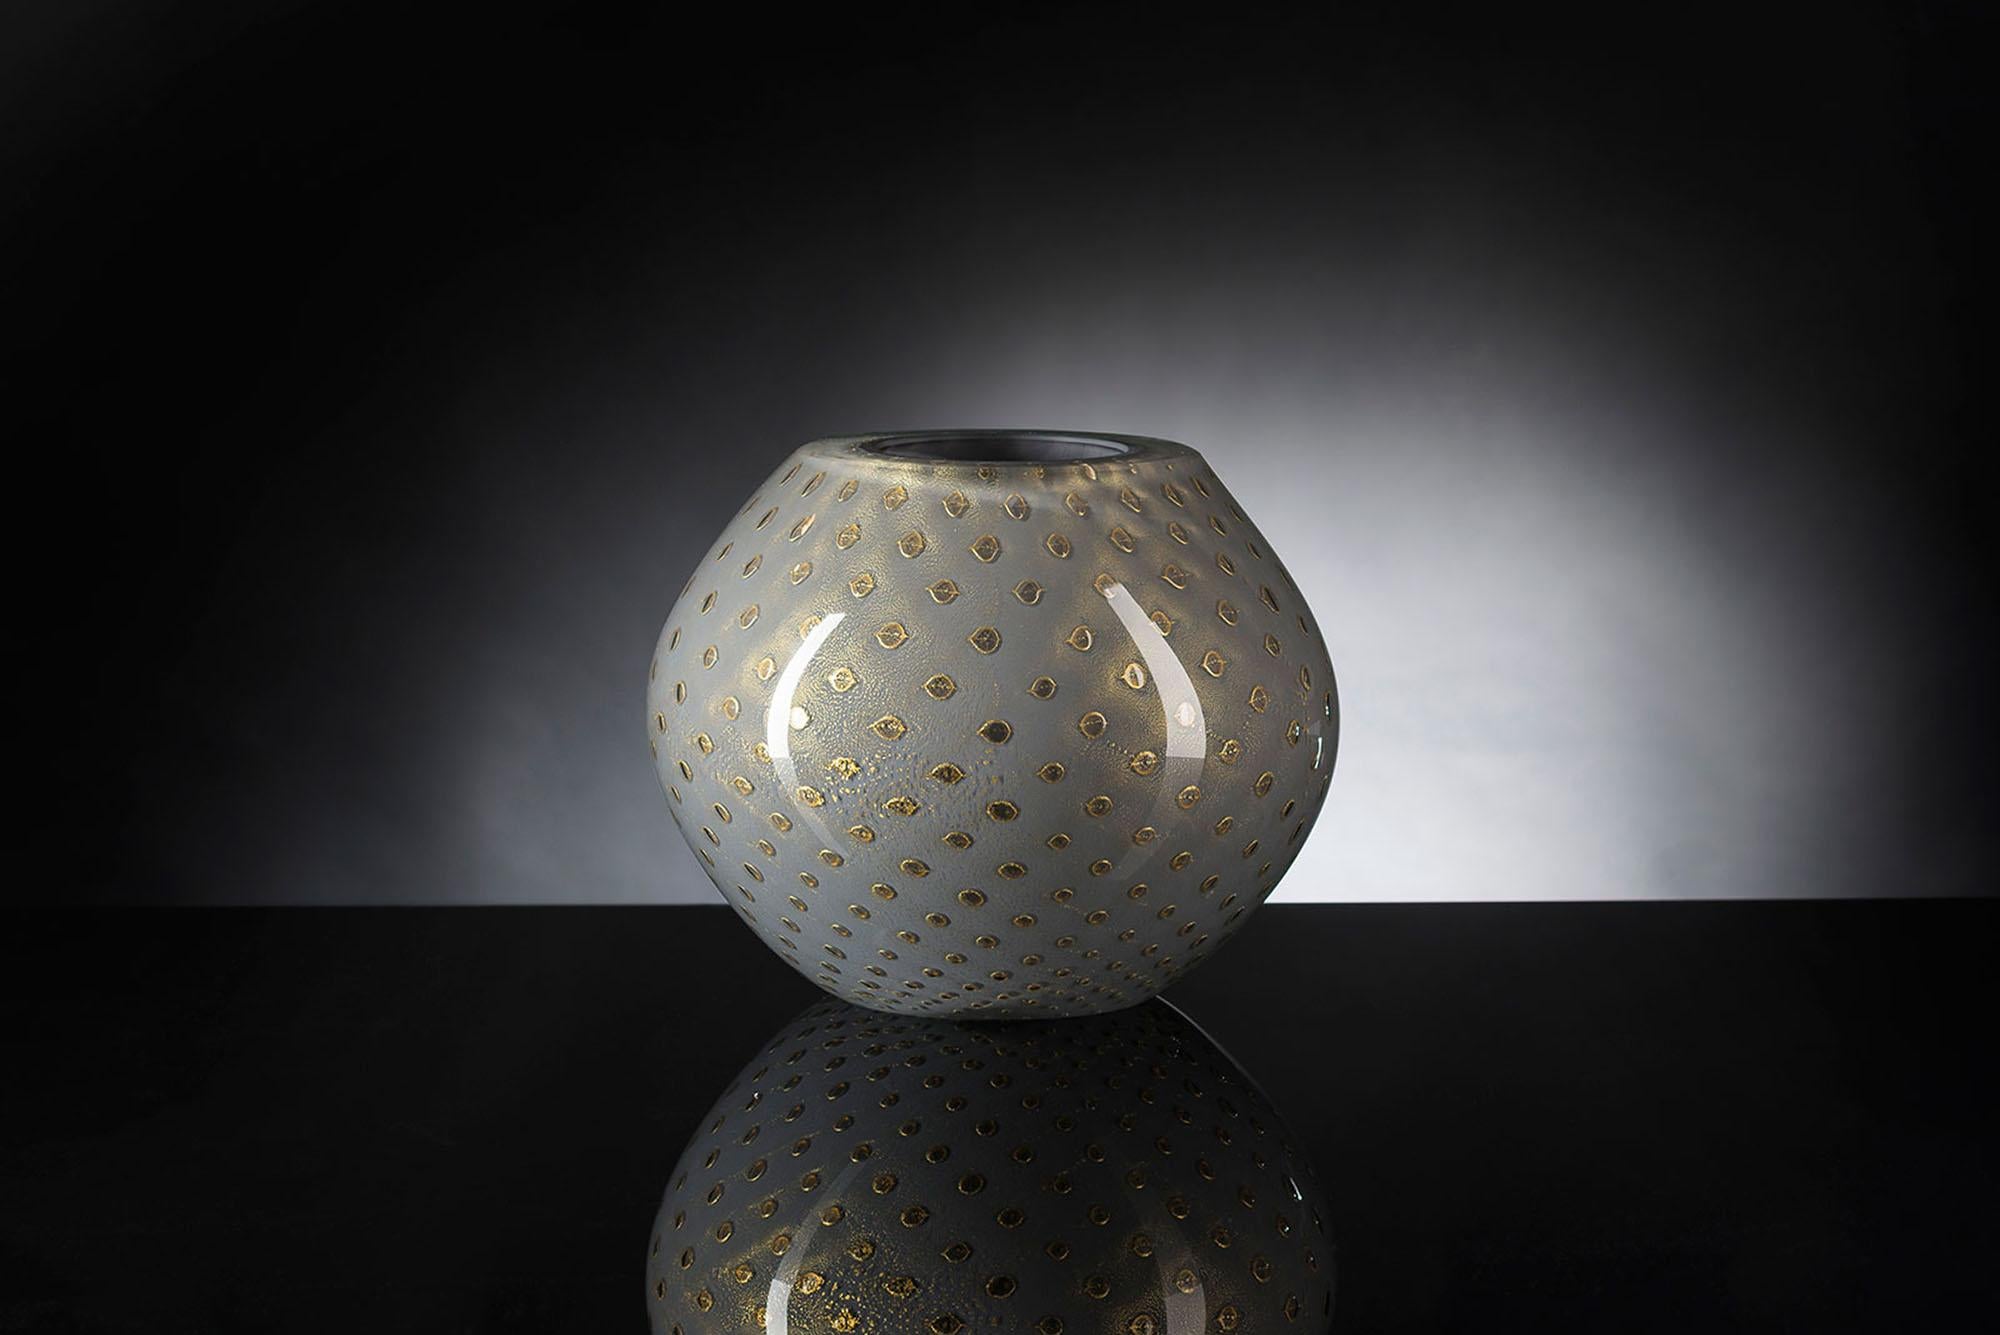 Deep focus on craftsmanship and made in Italy are emphasized by Muranese glass that characterizes several new products. The oldest handmade ability worldwide known is nowadays one of the few forms of crafts related to the world of art and design